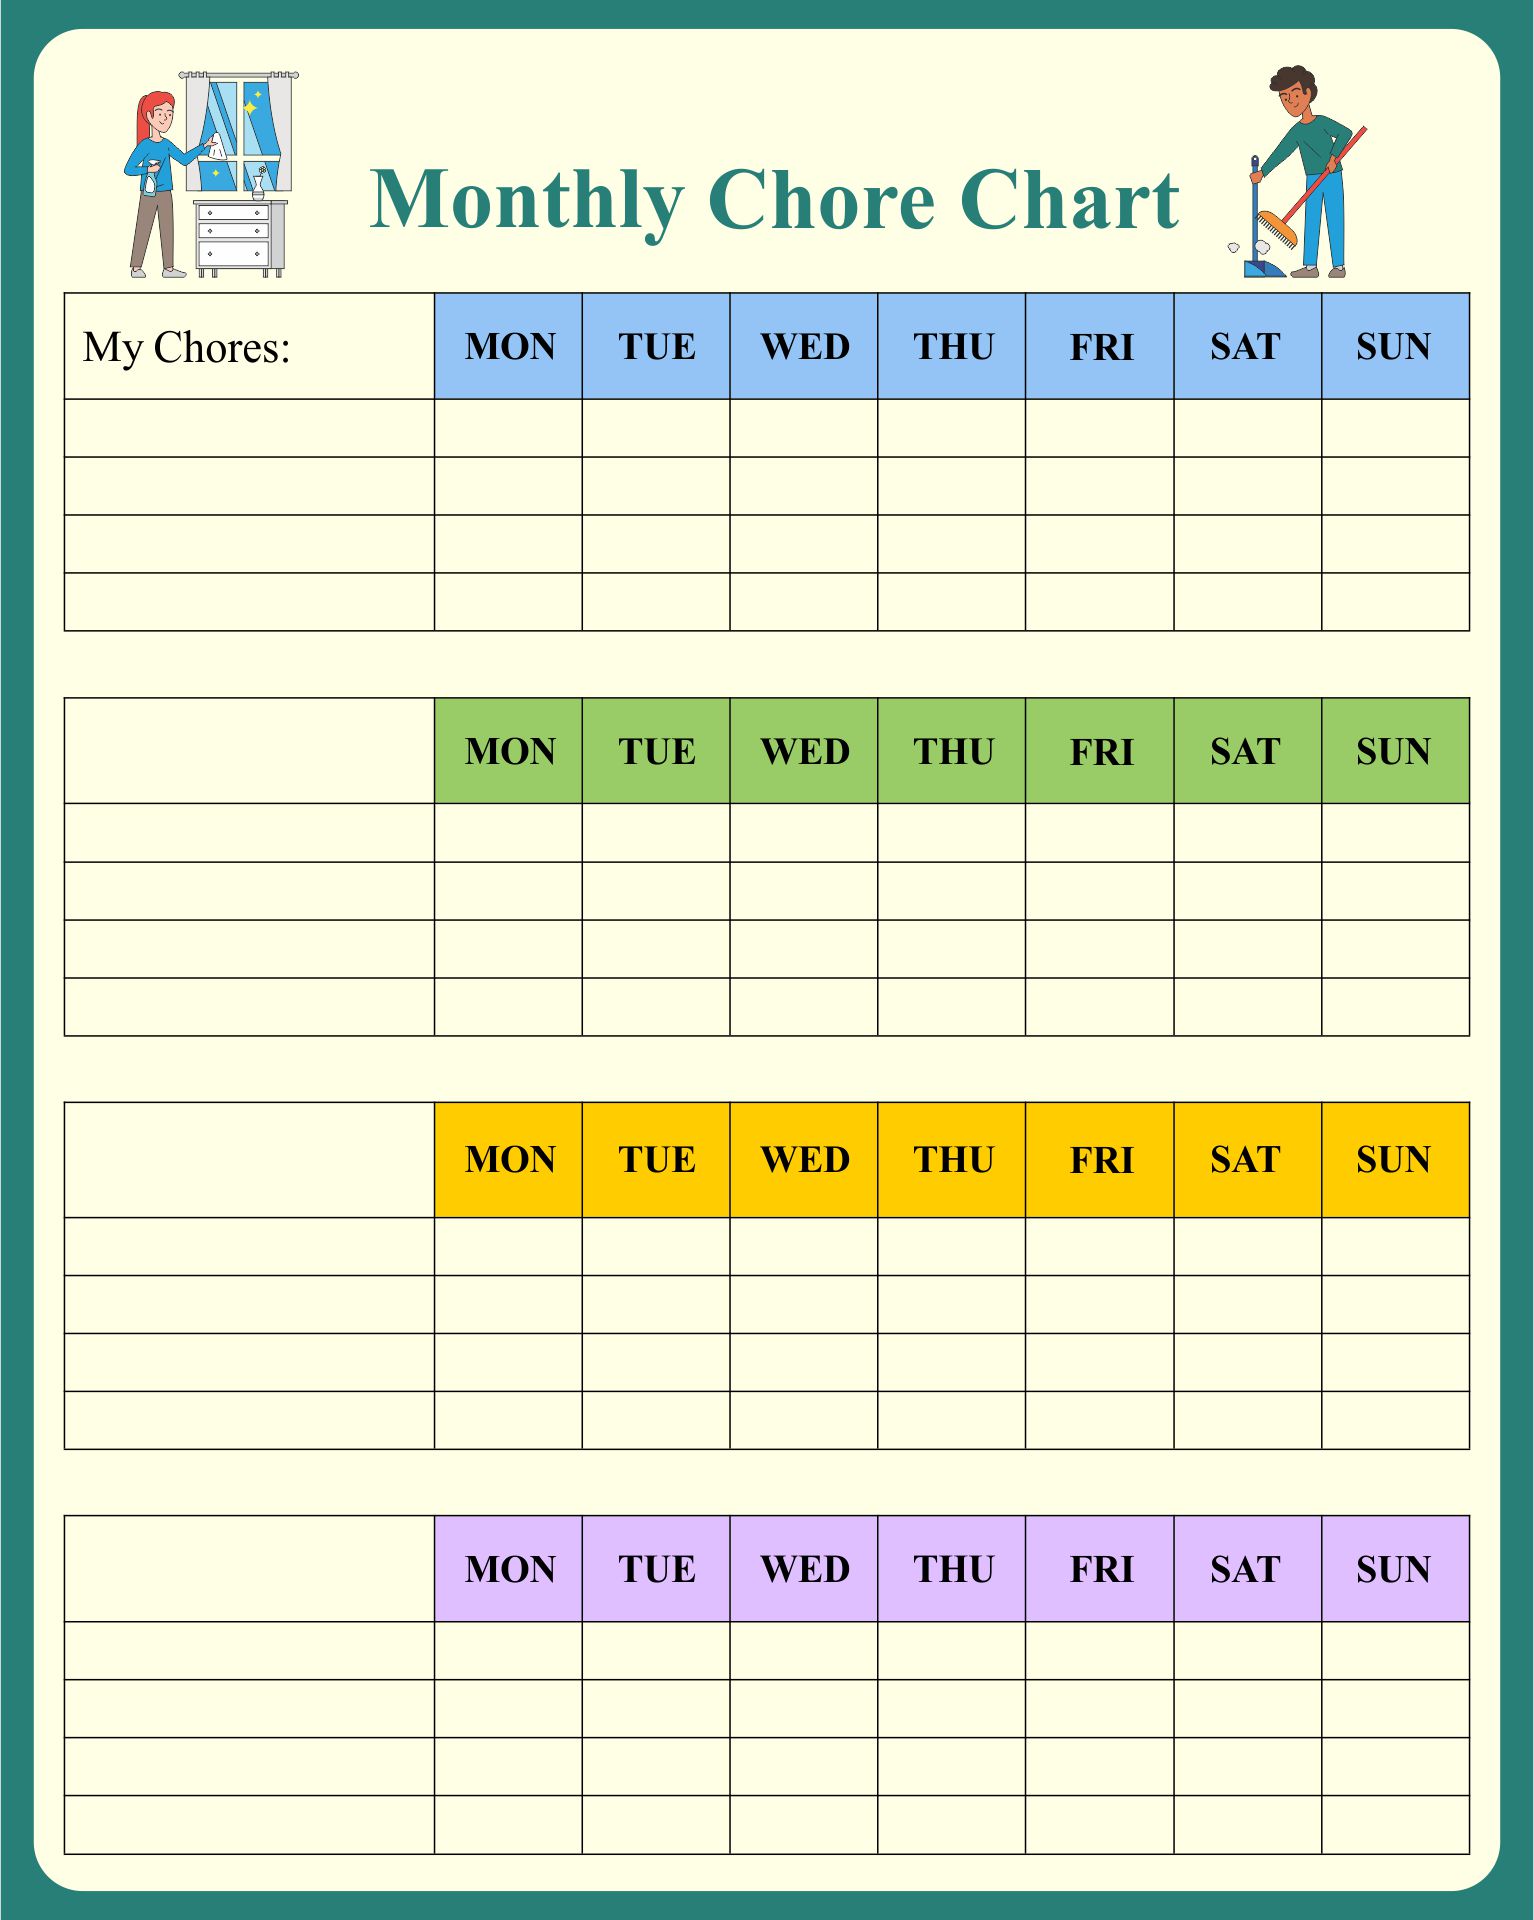 chore chart monthly